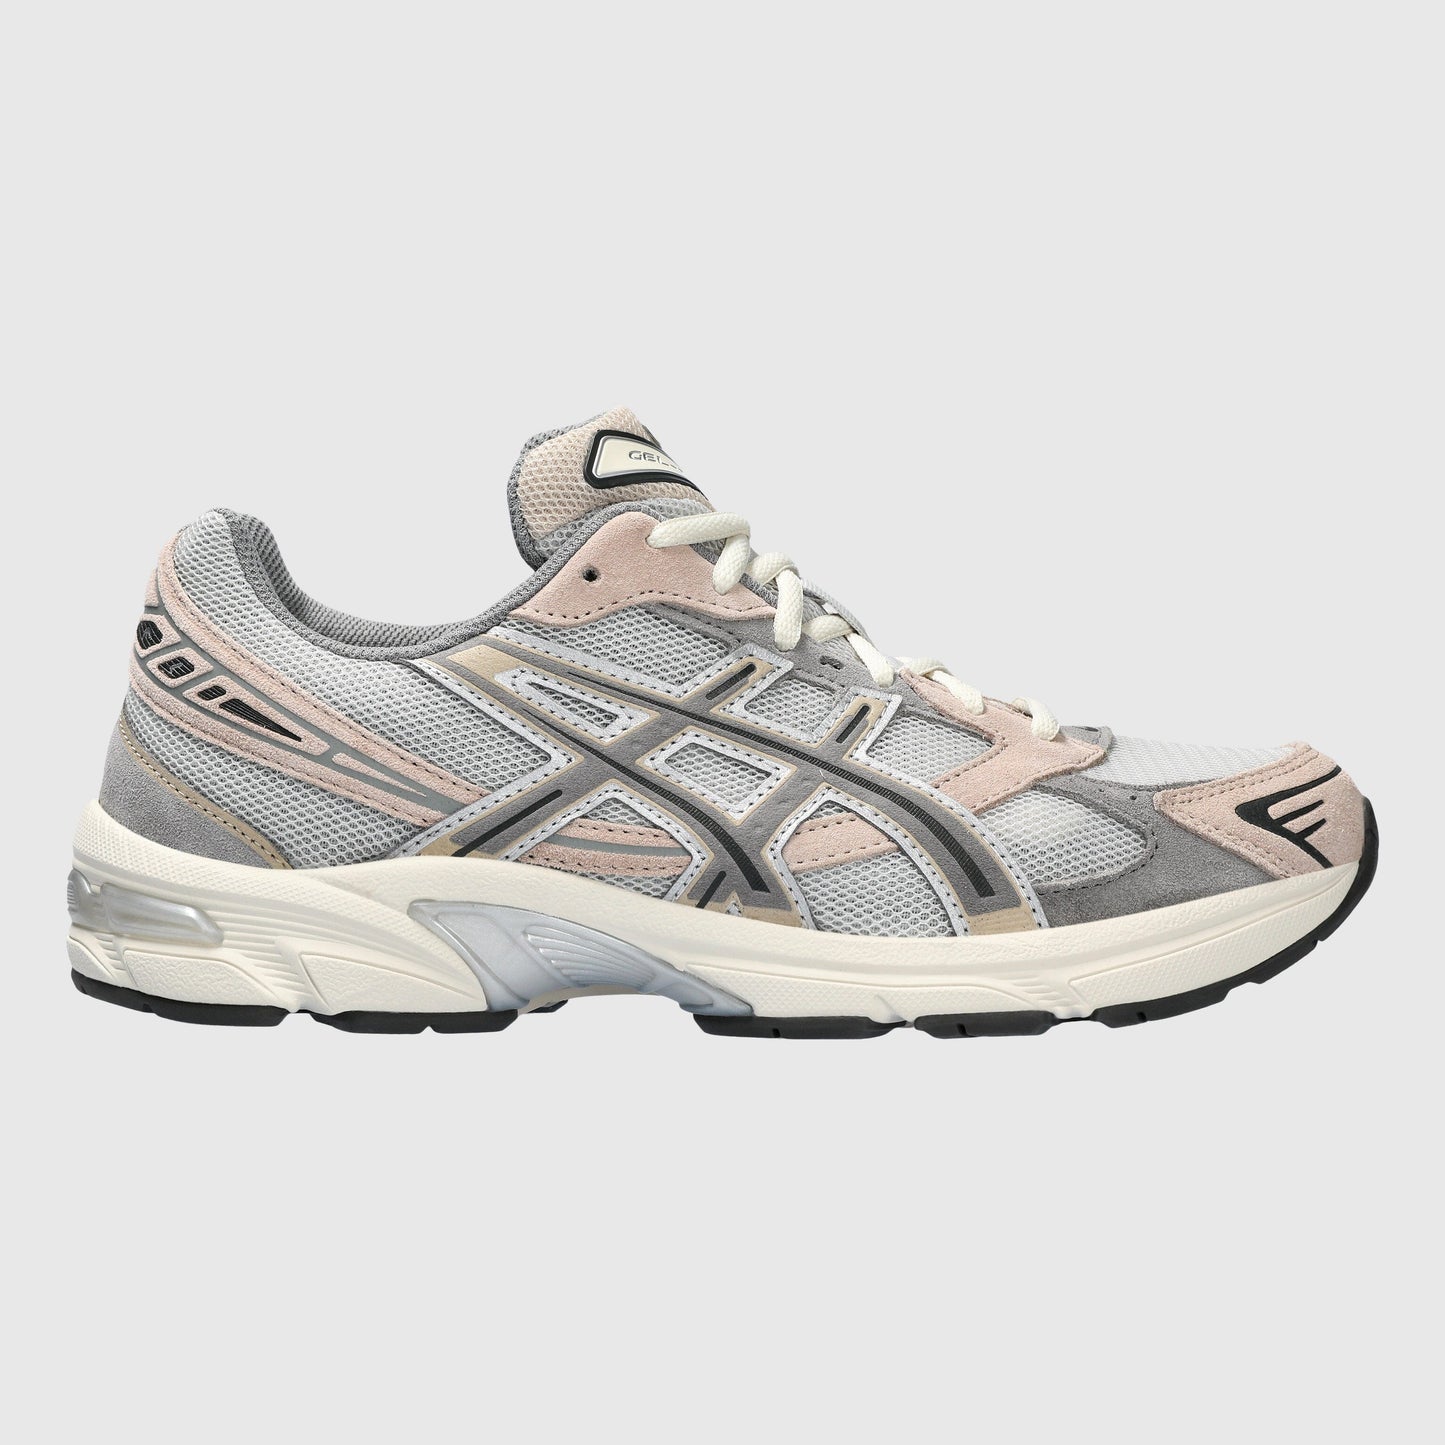 Asics Gel-1130 Sneakers - Oyster Grey / Clay Grey Sneakers Asics 